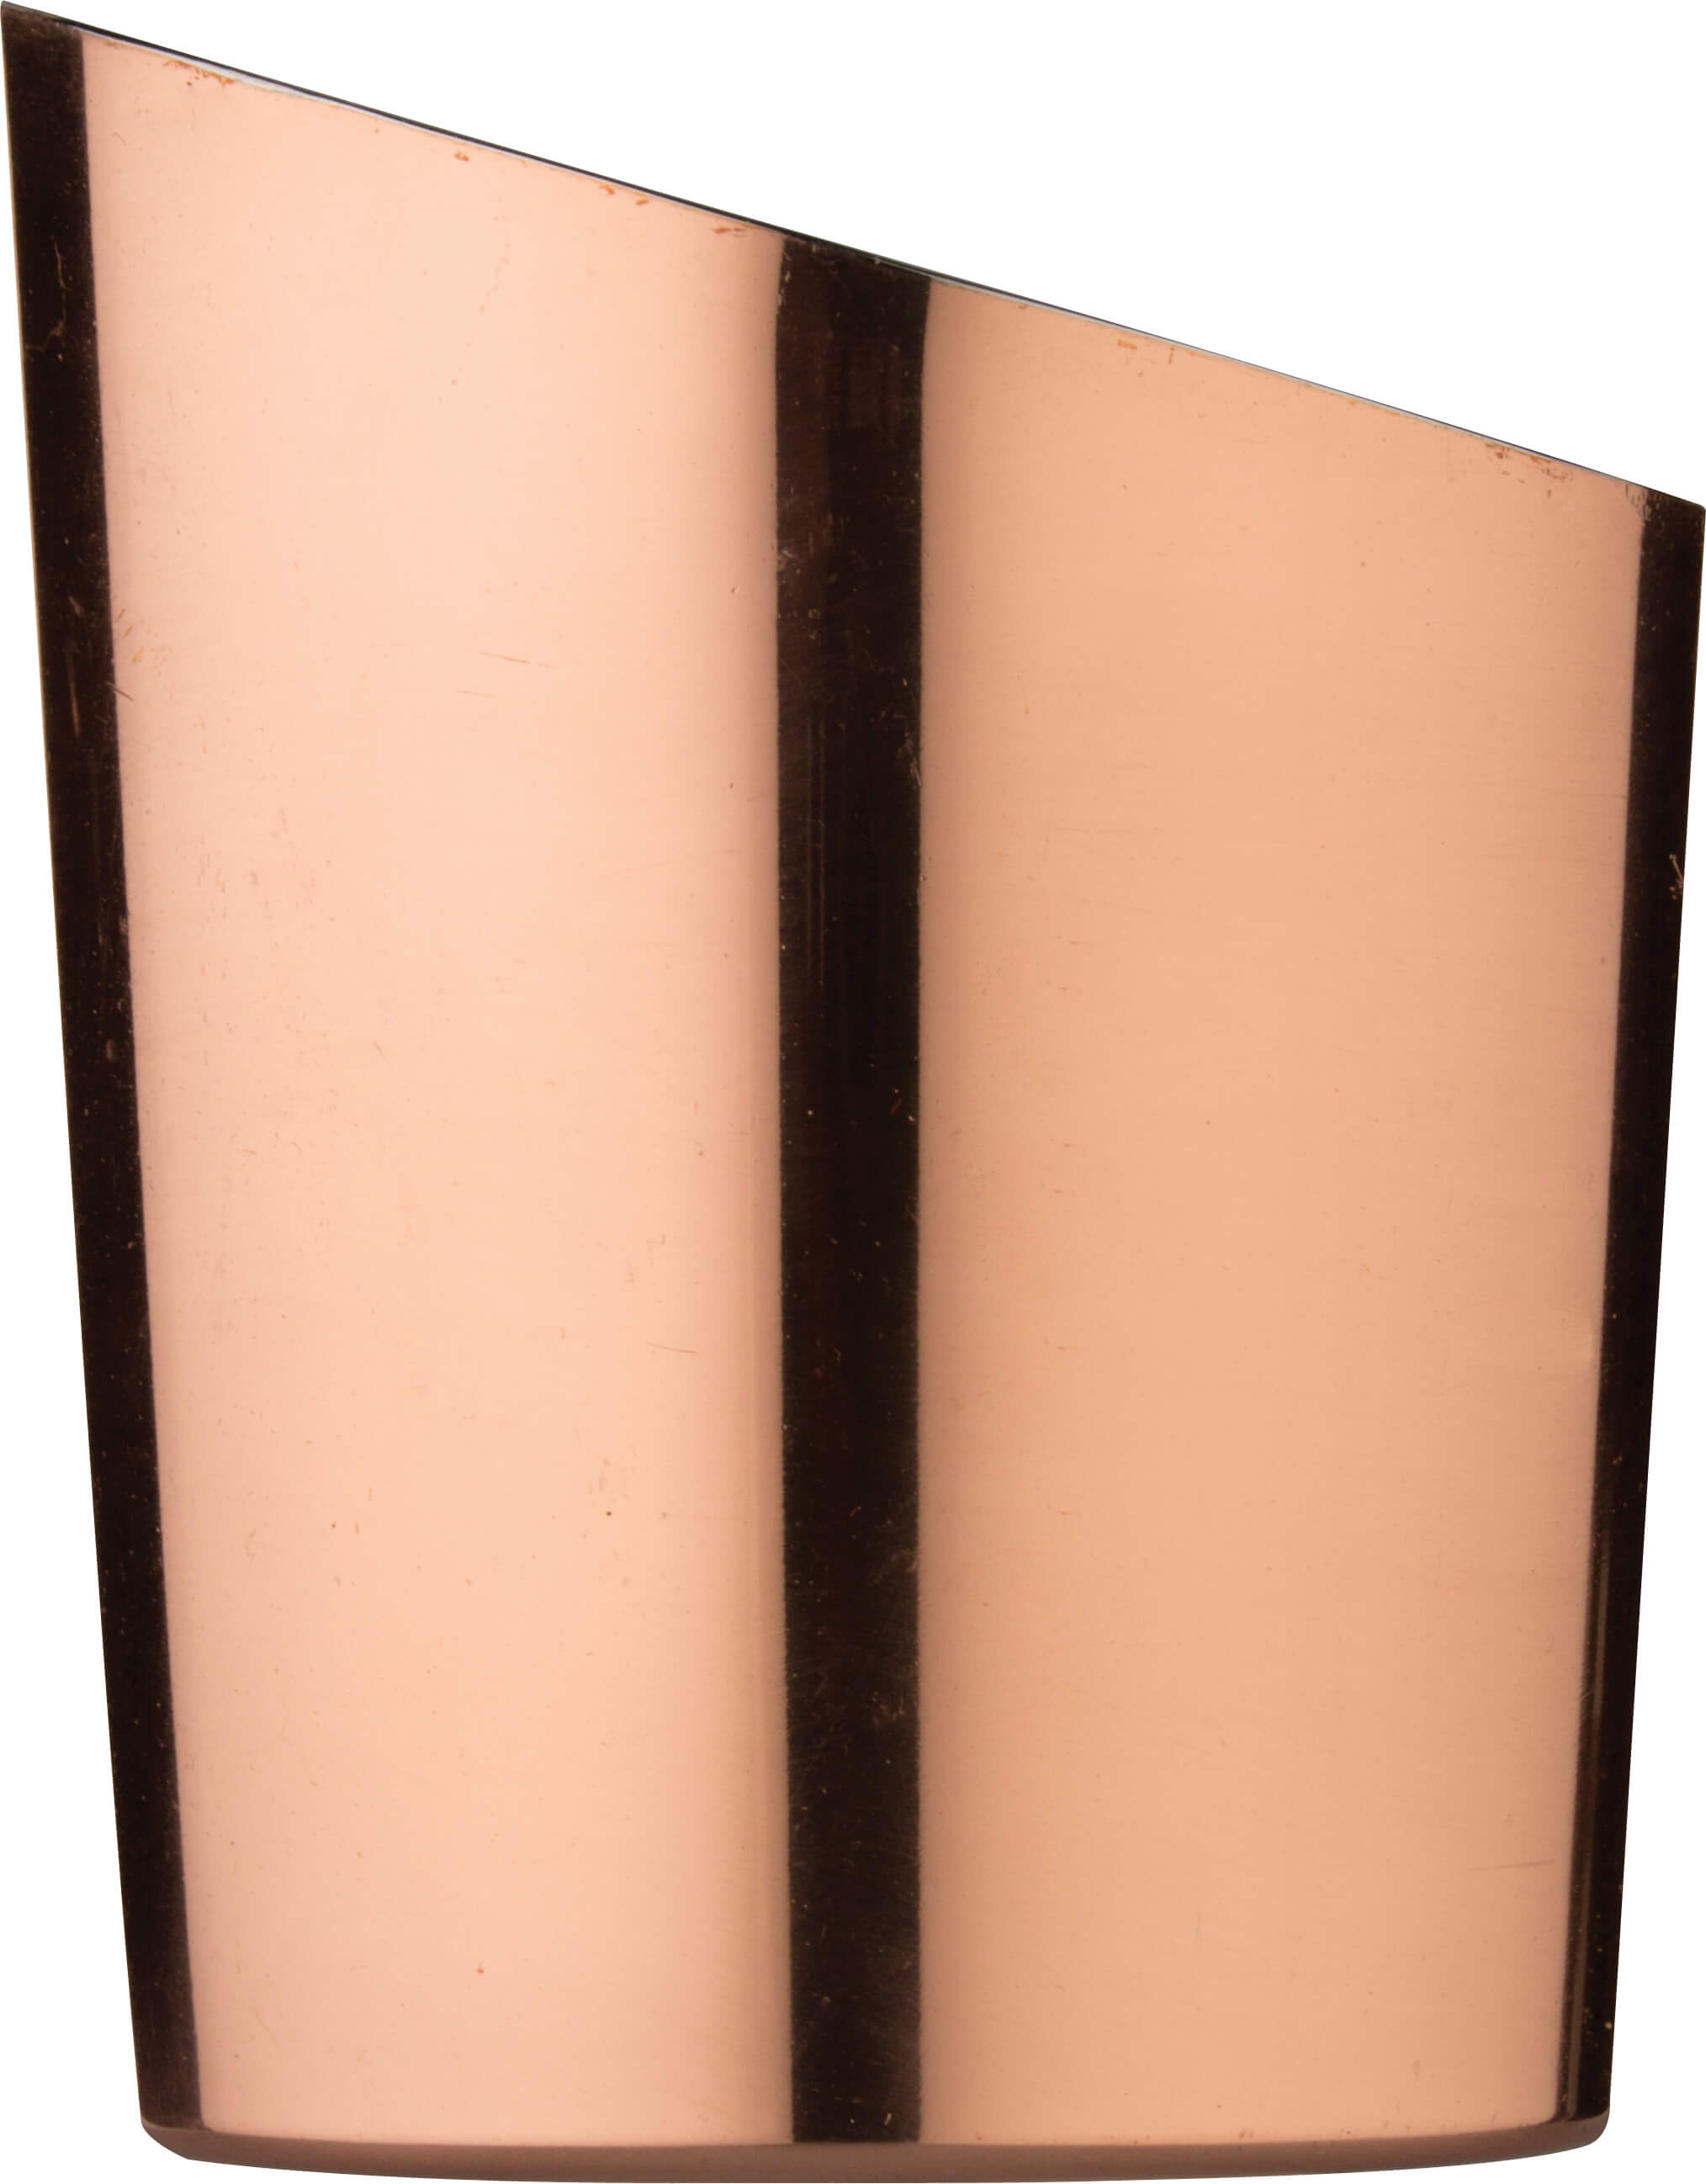 Stainless steel cup, bevel cut - copper-colored (11,6cm)